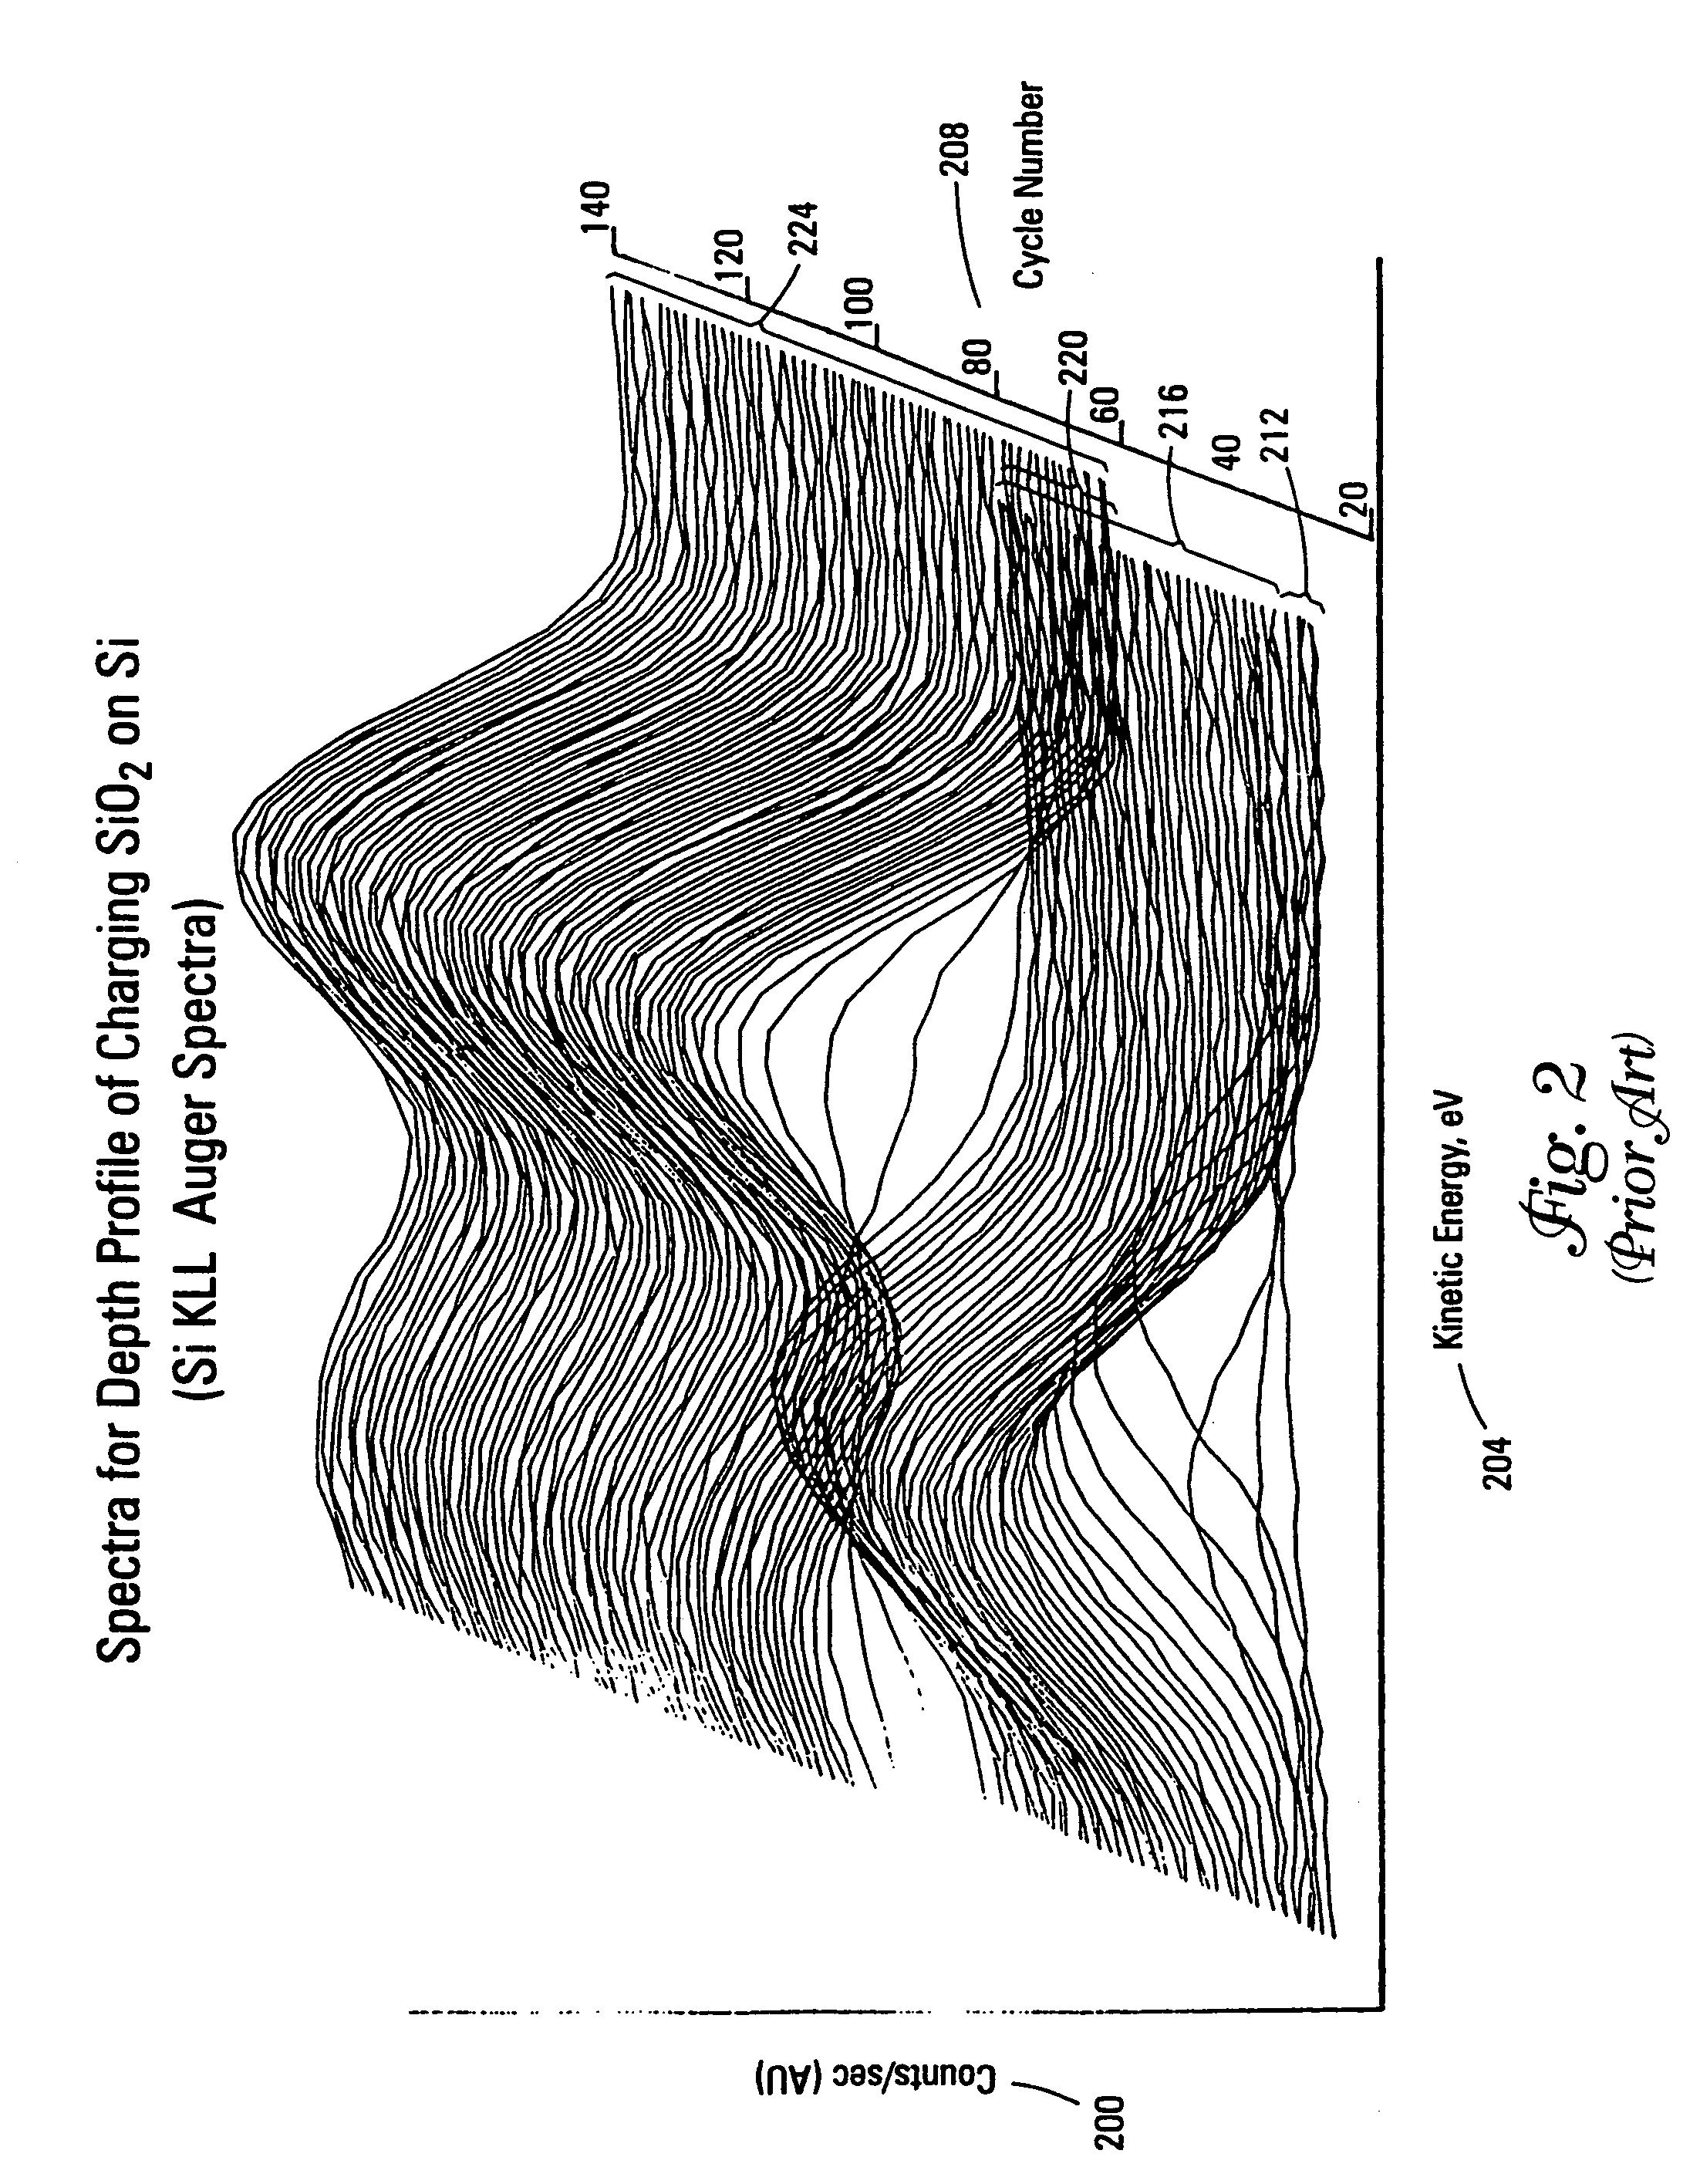 Method and apparatus for compensating waveforms, spectra, and profiles derived therefrom for effects of drift